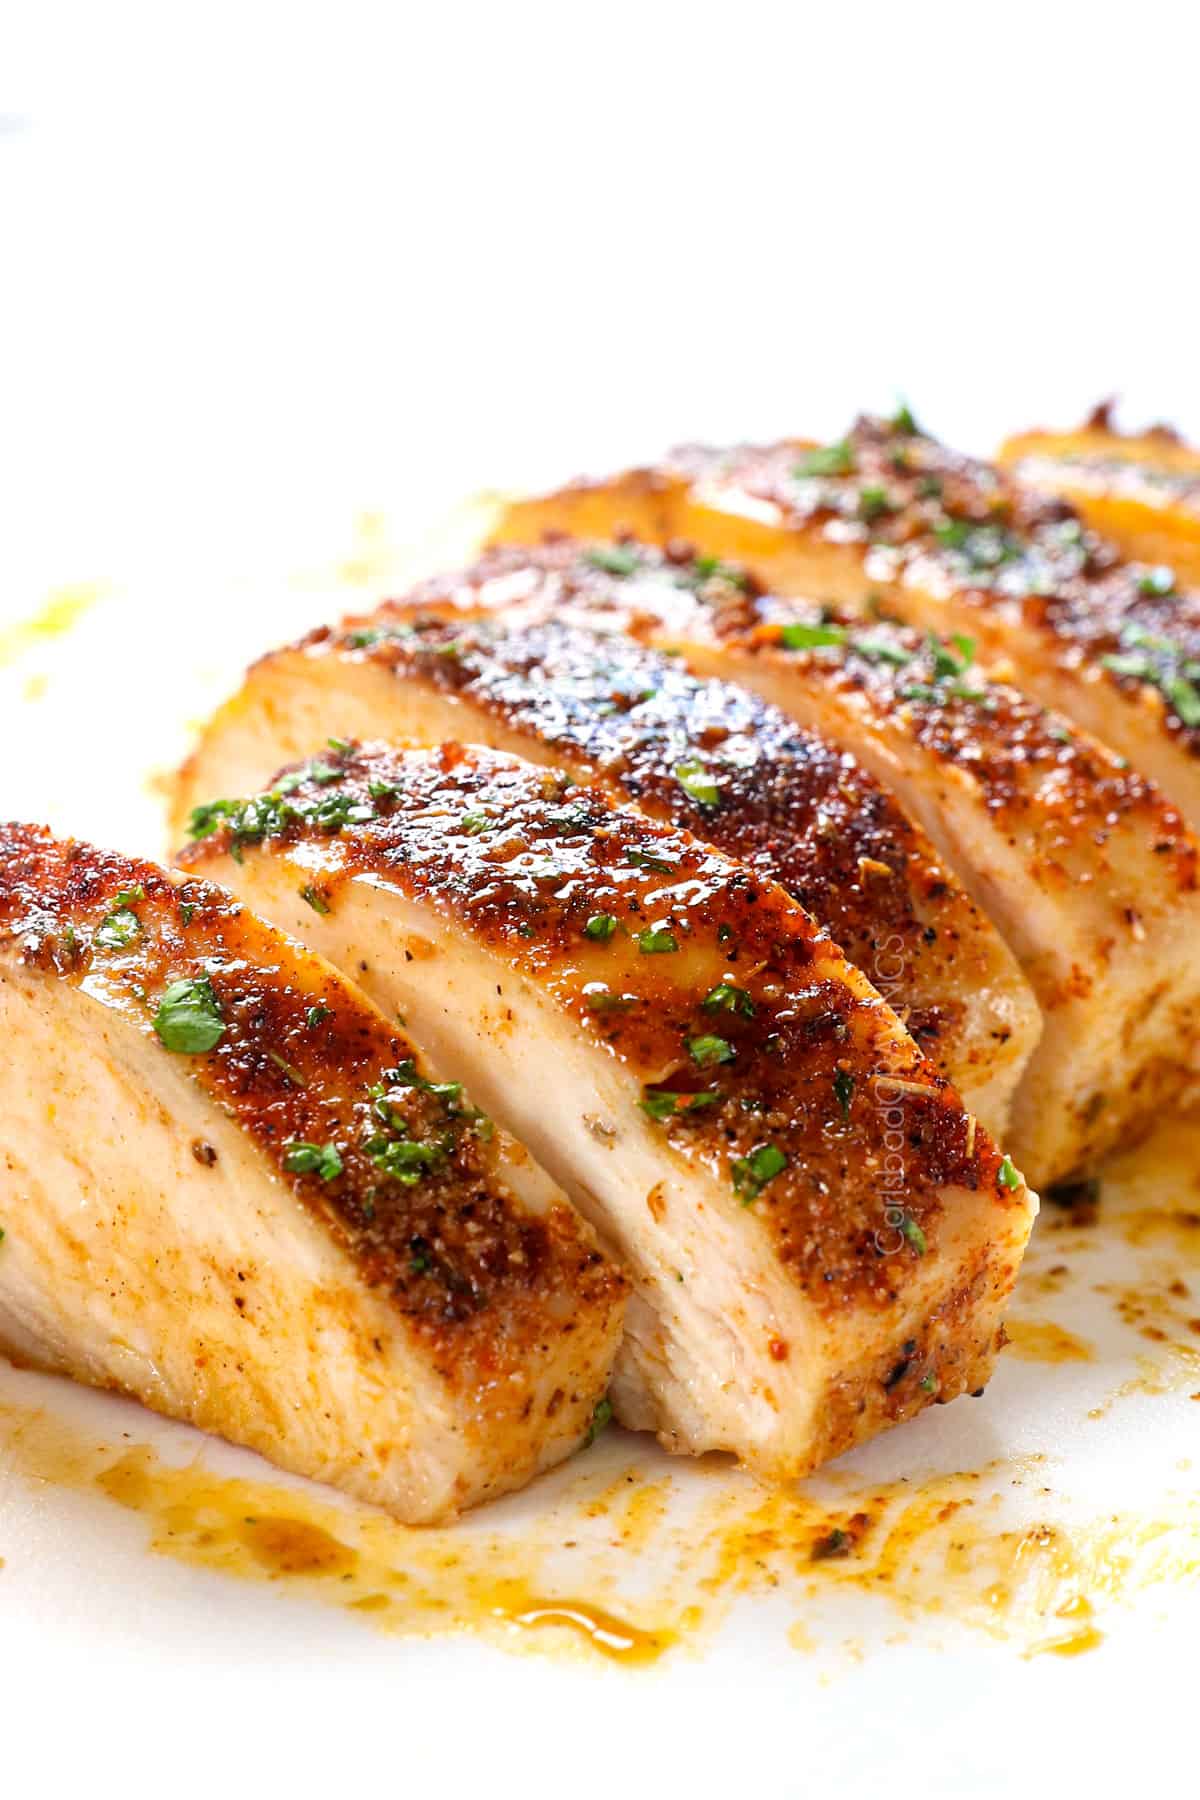 oven baked chicken breast sliced on a cutting board showing how juicy it is